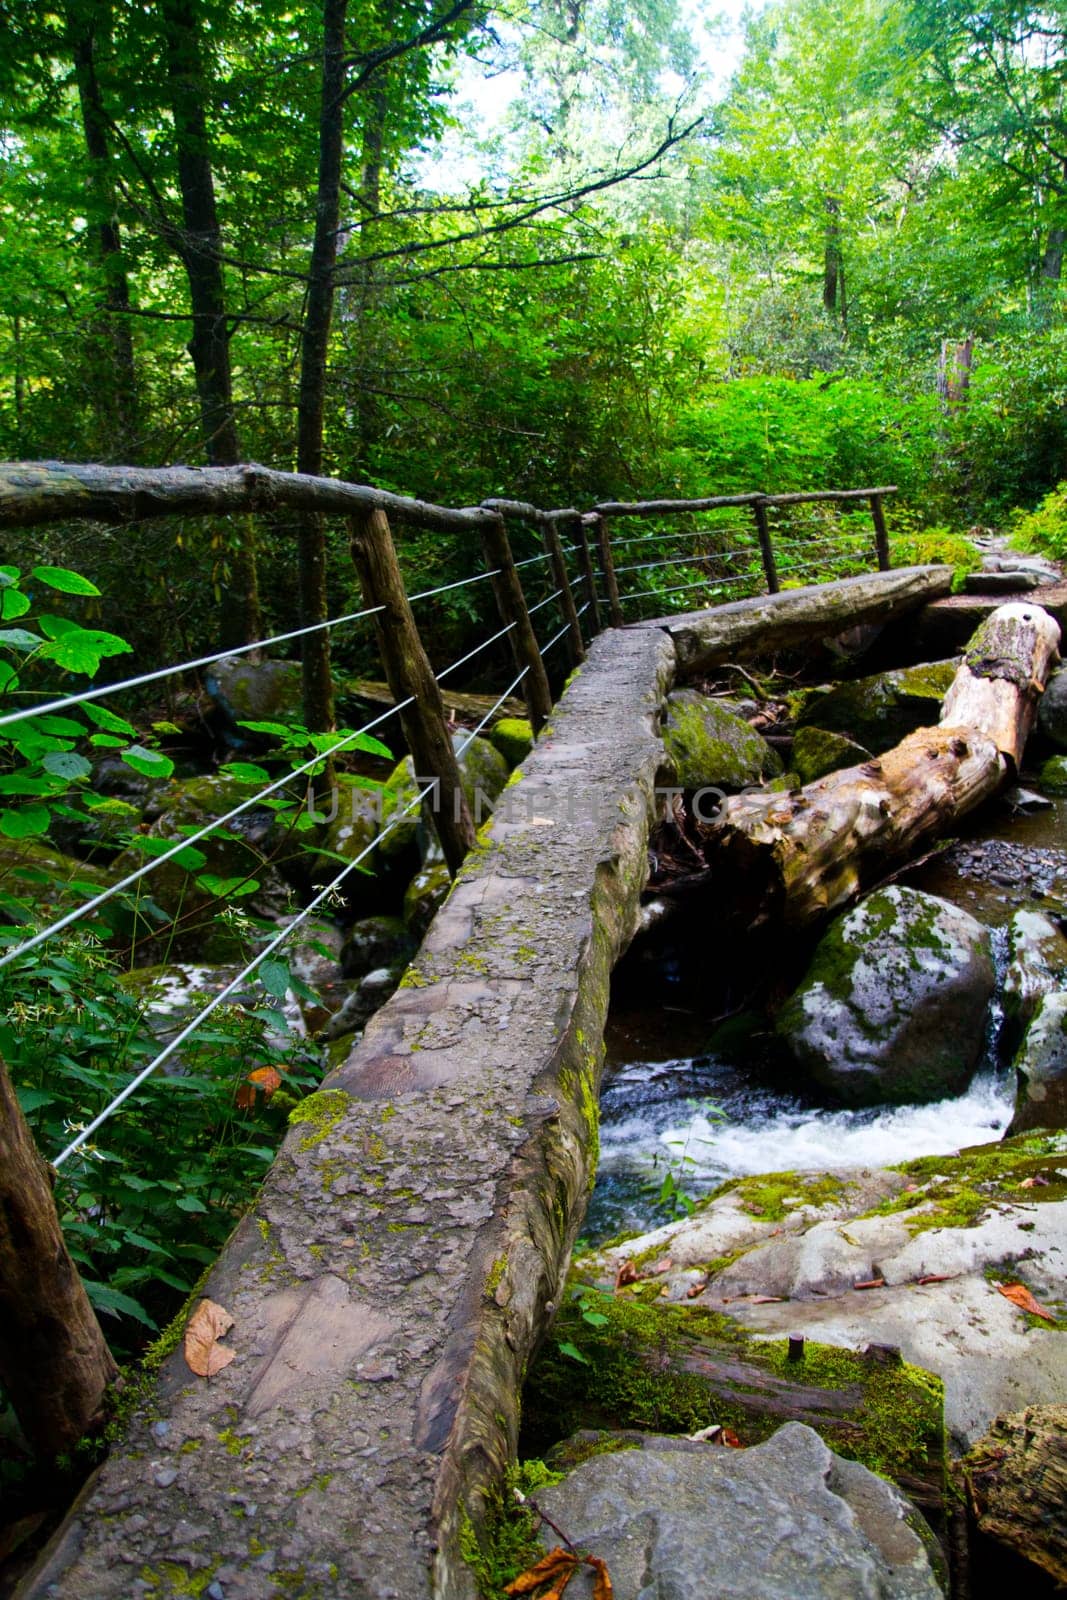 Crossing Wood Log Narrow Bridge Over Brook in Tennessee Forest by njproductions